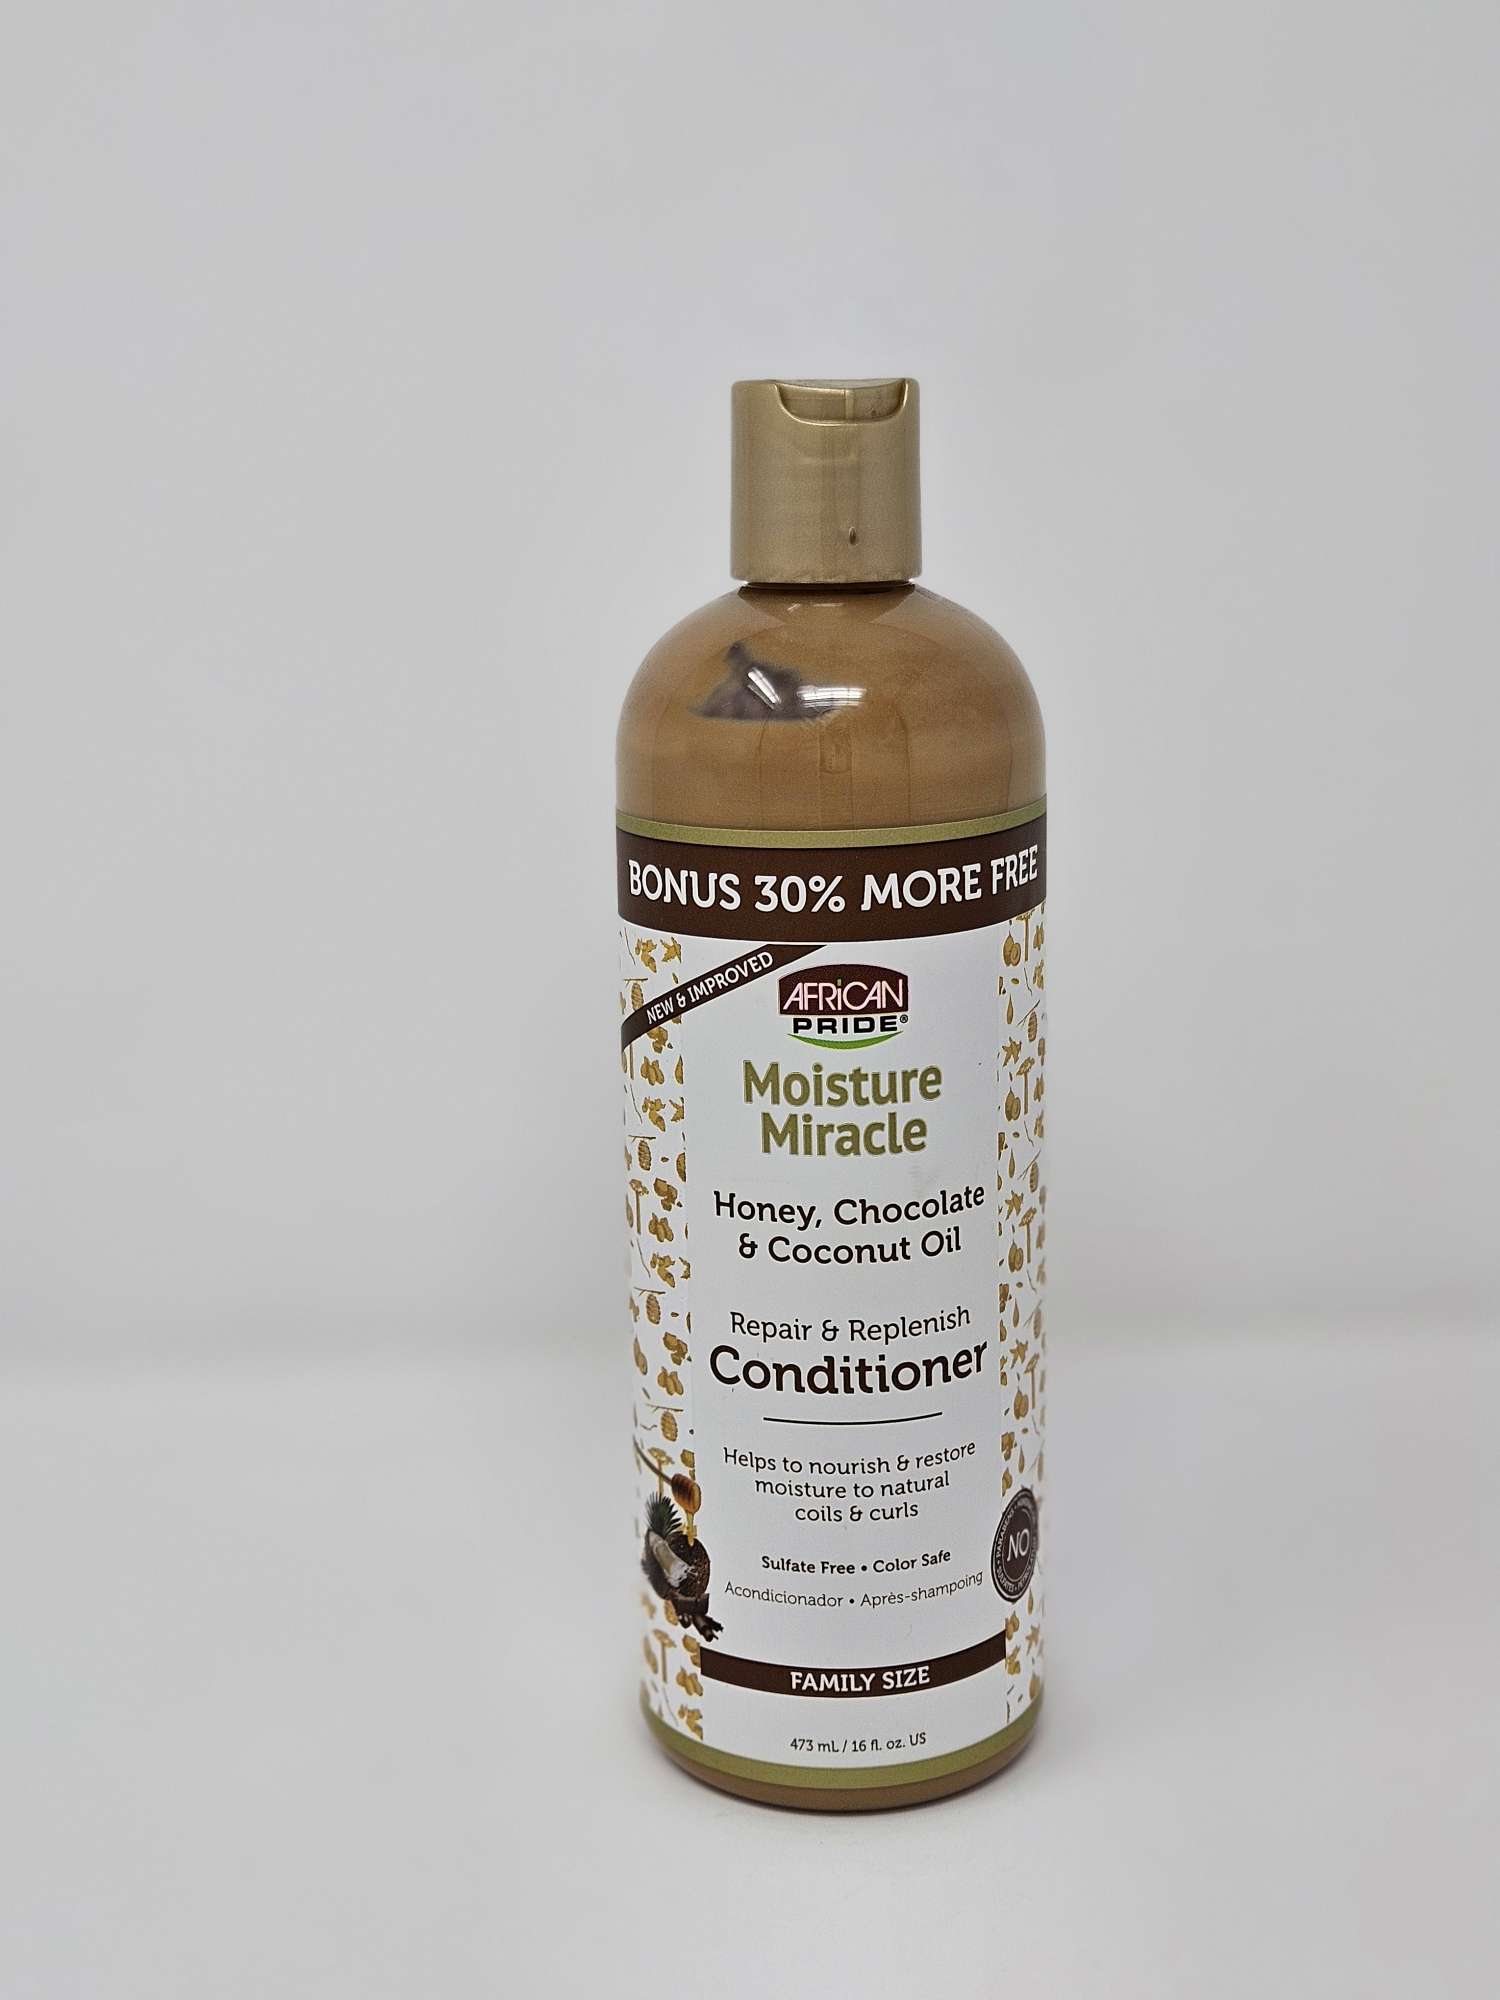 African Pride Moisture Miracle Honey, Chocolate & Coconut Oil Conditioner - 16oz